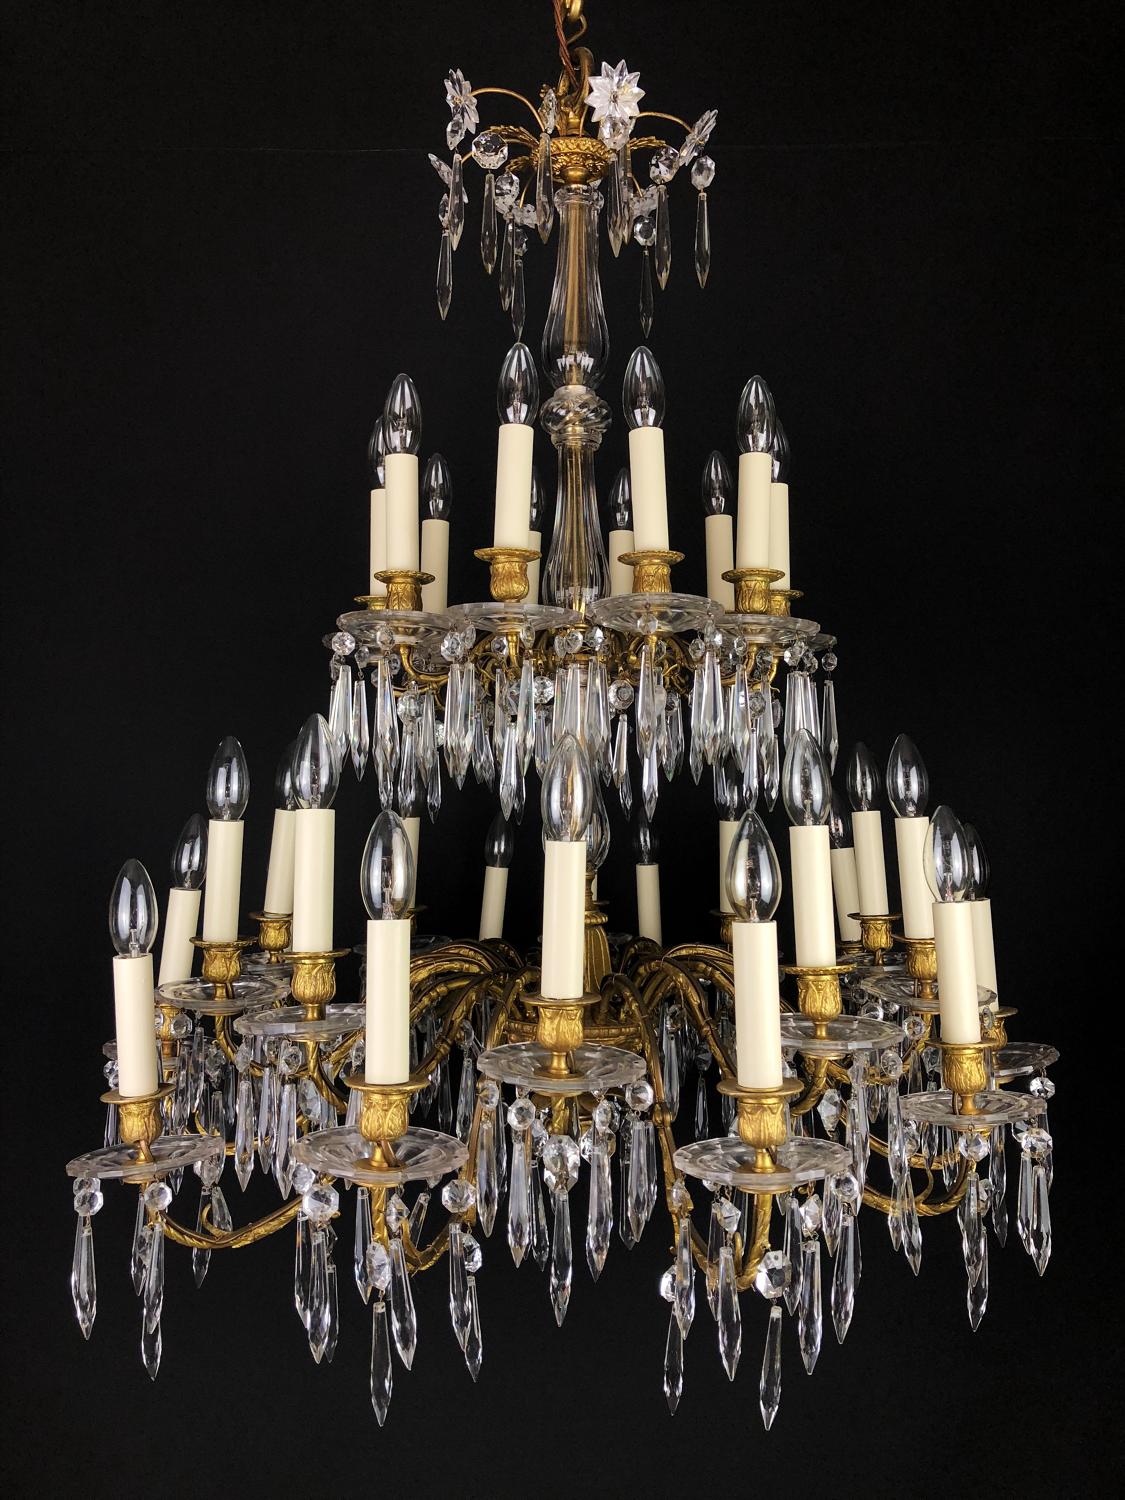 A Large Empire Chandelier